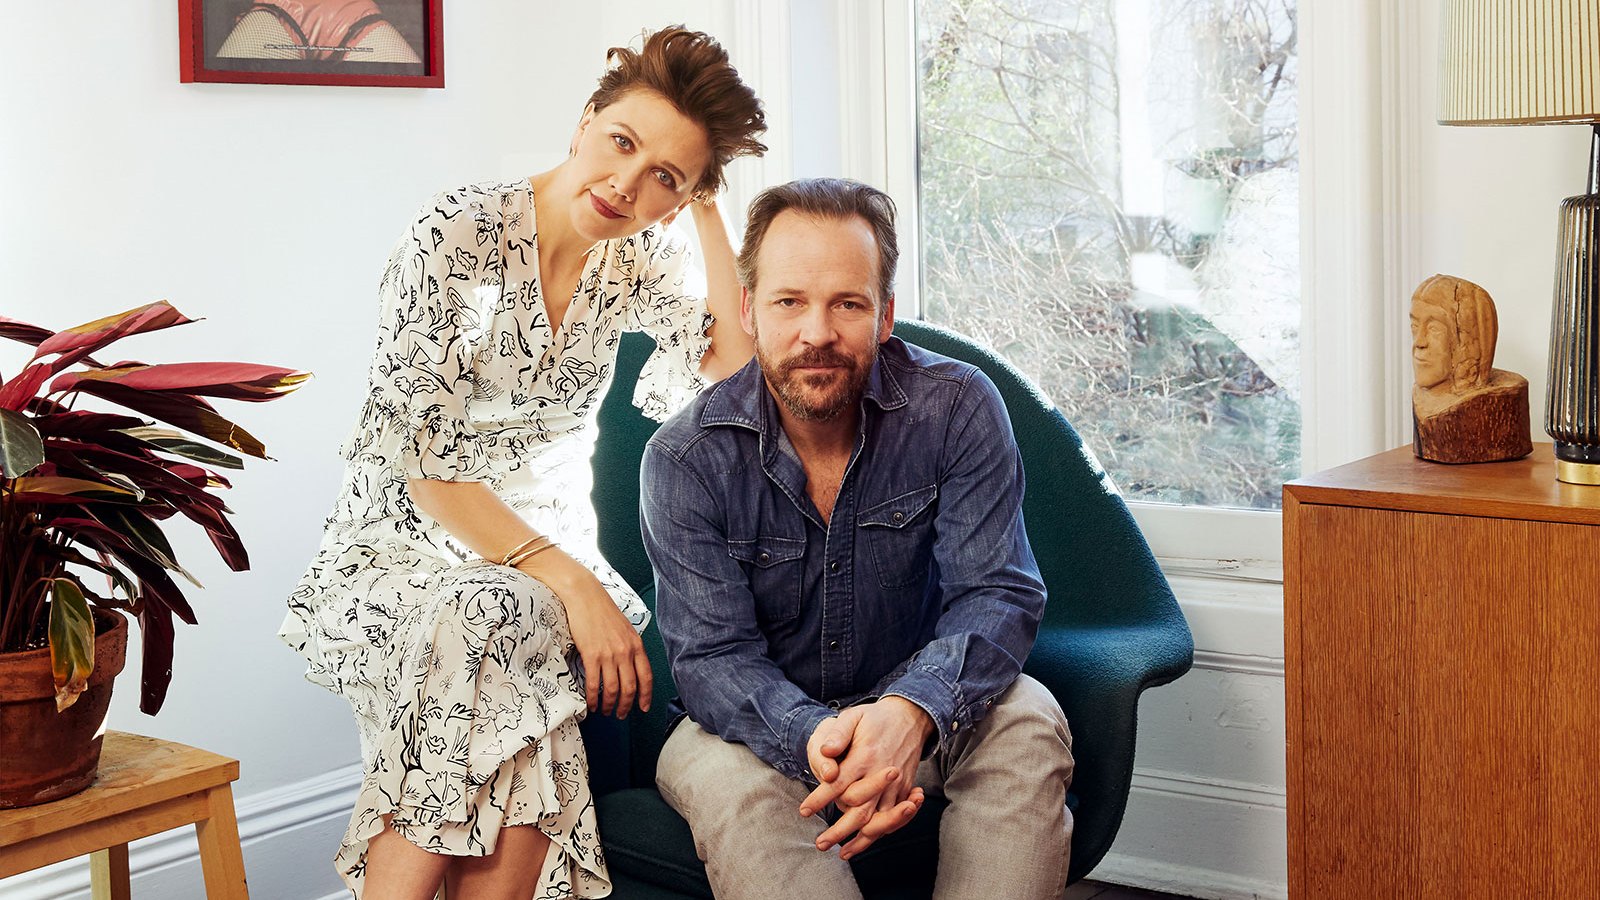 Maggie Gyllenhaal Shares Photos of Her Home